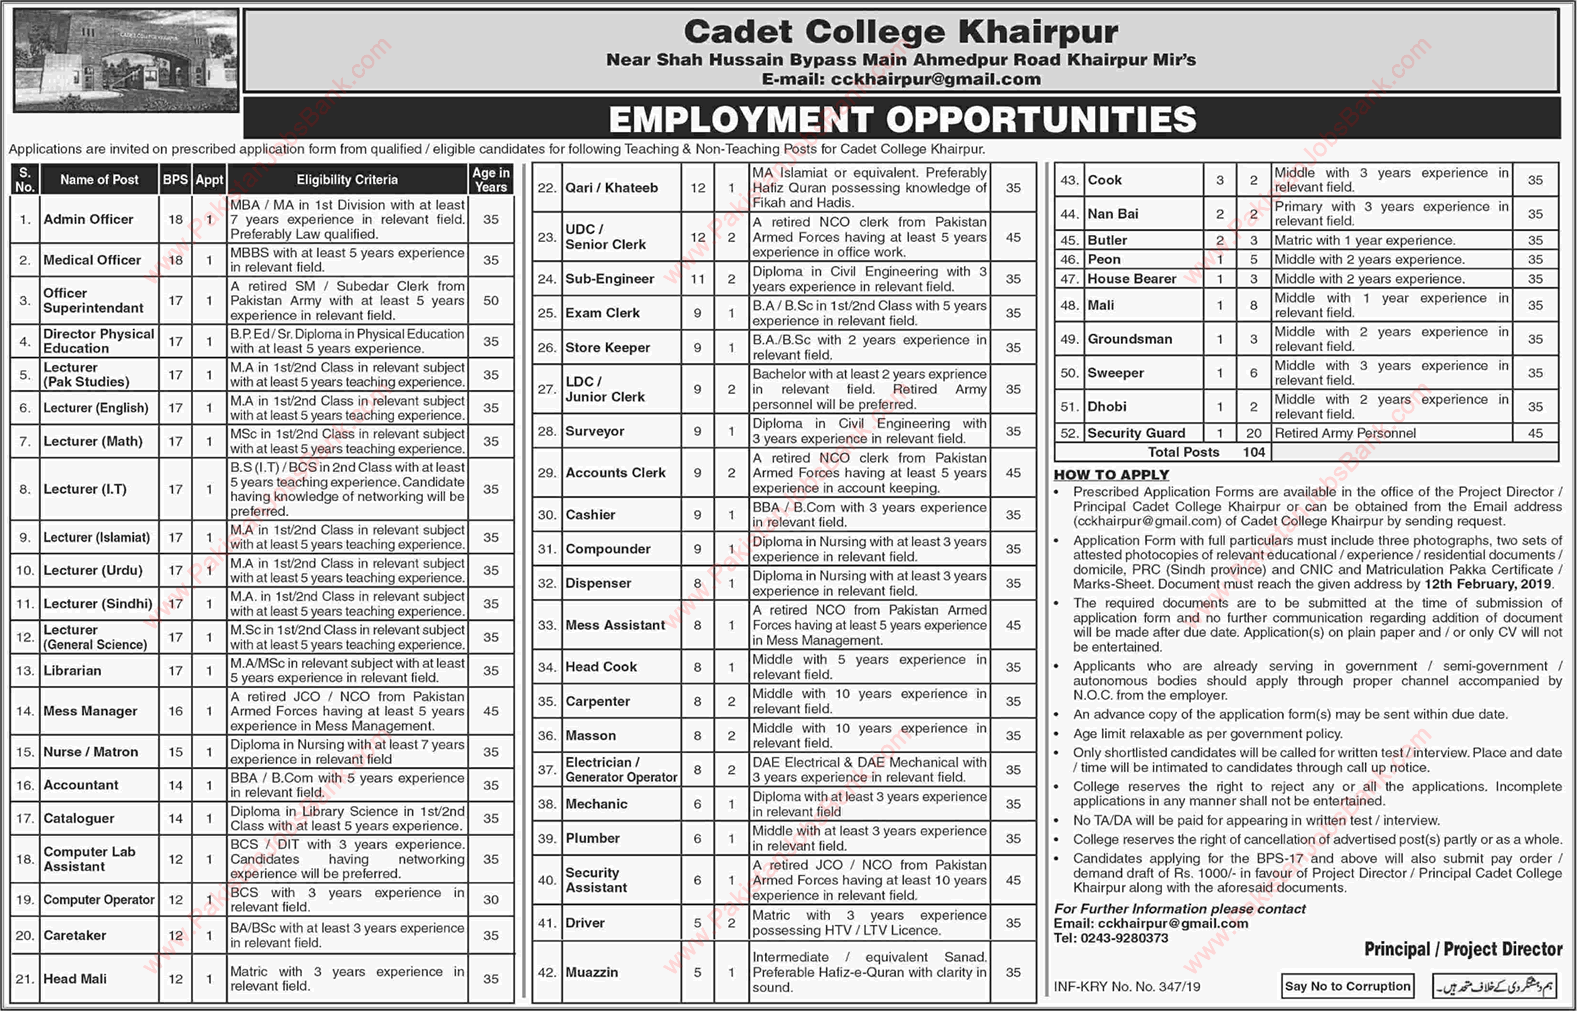 Cadet College Khairpur Jobs 2019 Lecturers, Clerks, Security Guards & Others Latest